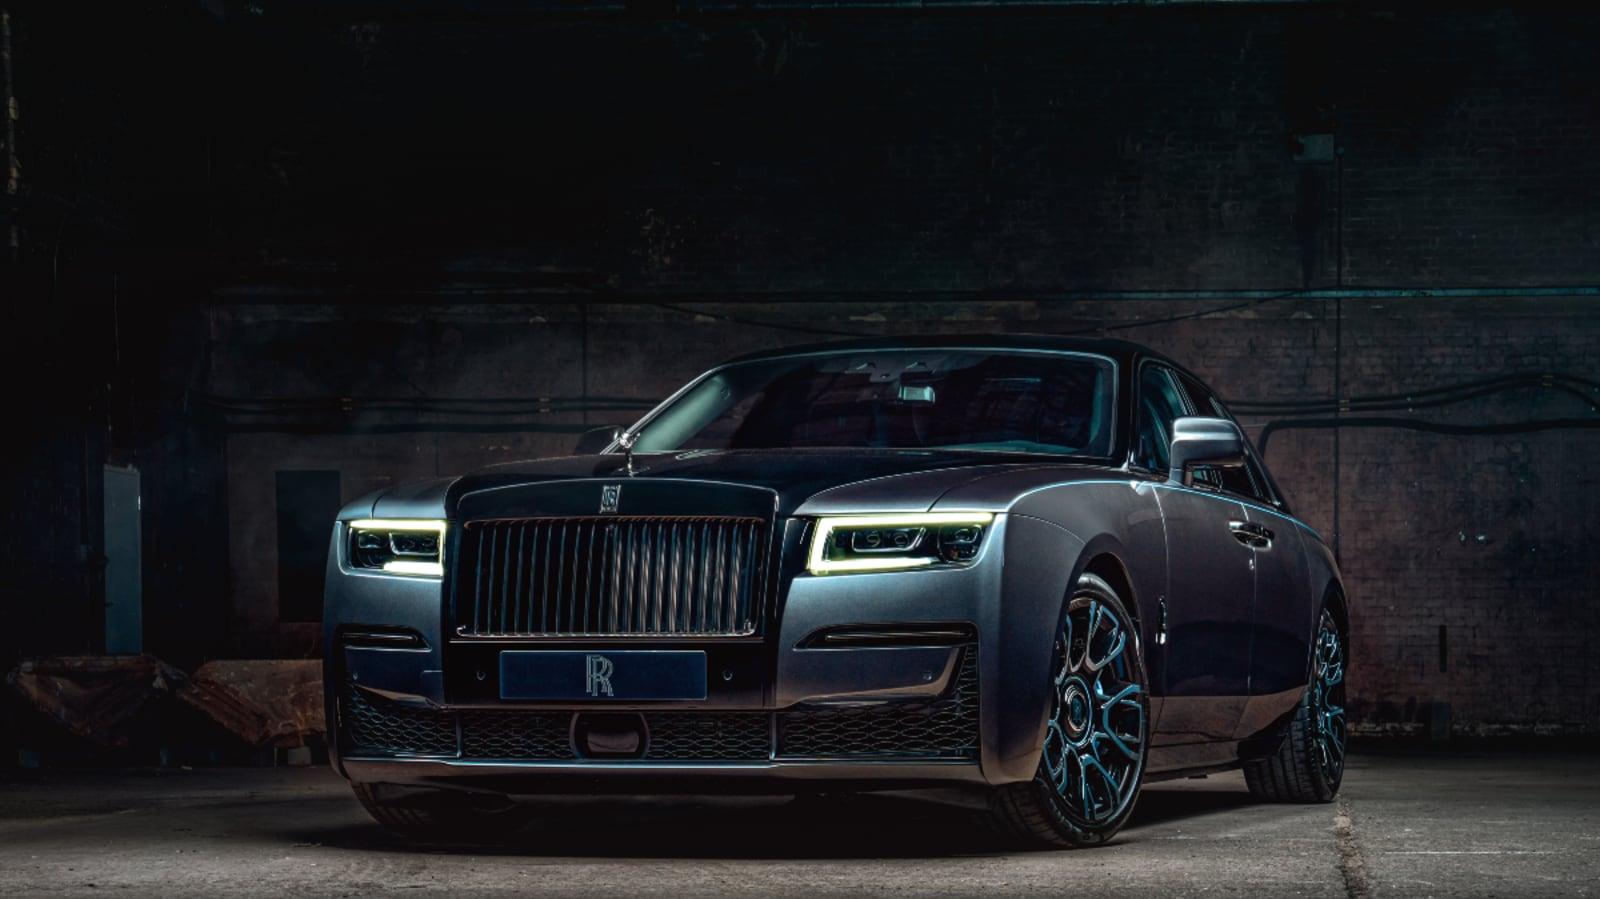 Rolls Royce Motor Cars Records Highest Ever Annual Sales in 117